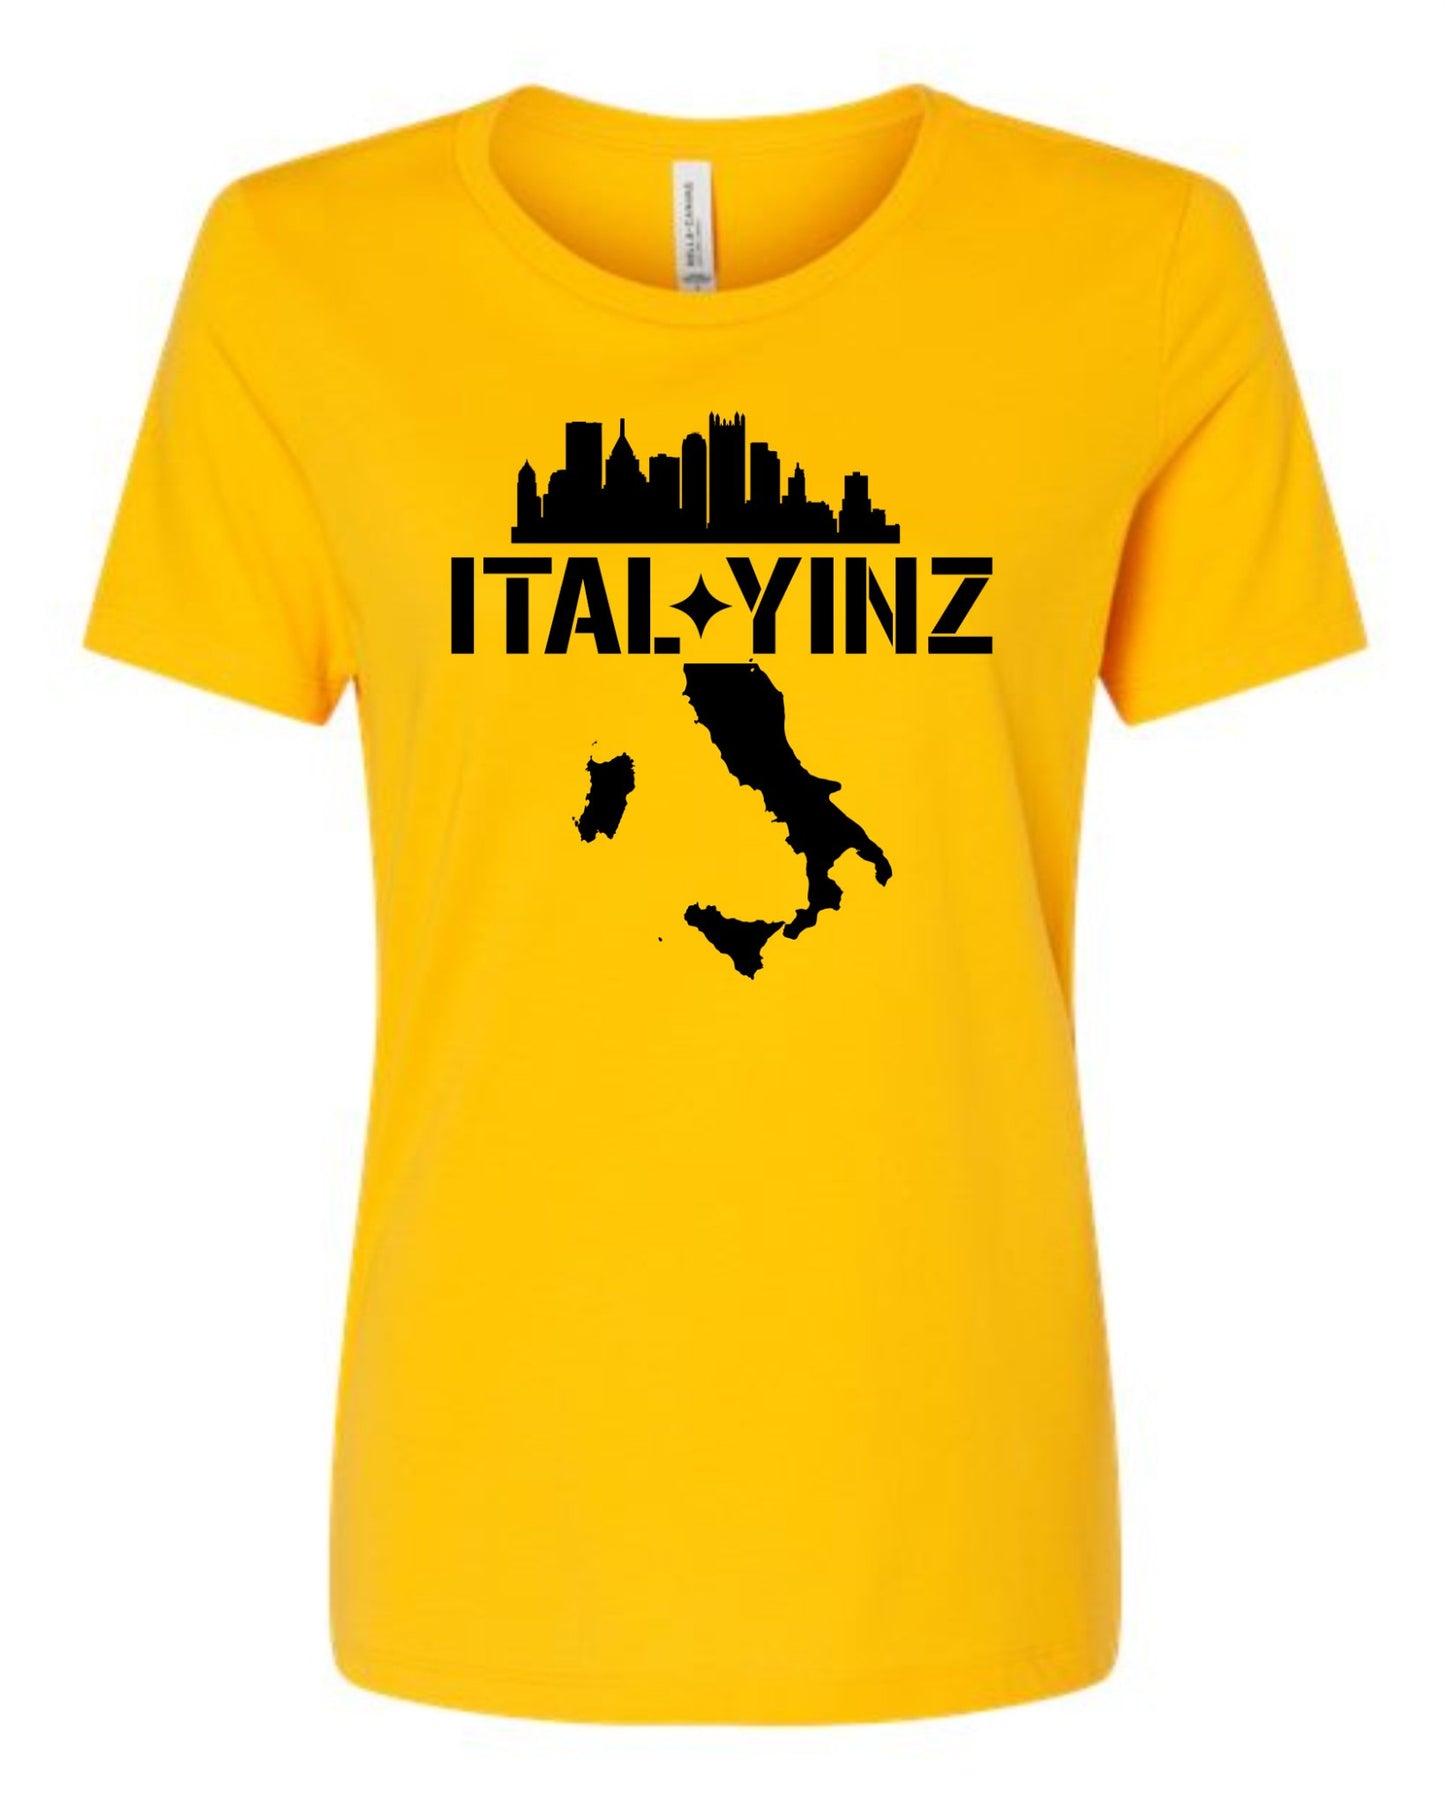 Ital Yinz Ladies Tshirt Pittsburghese For those Italian Pittsburghers - SBS T Shop